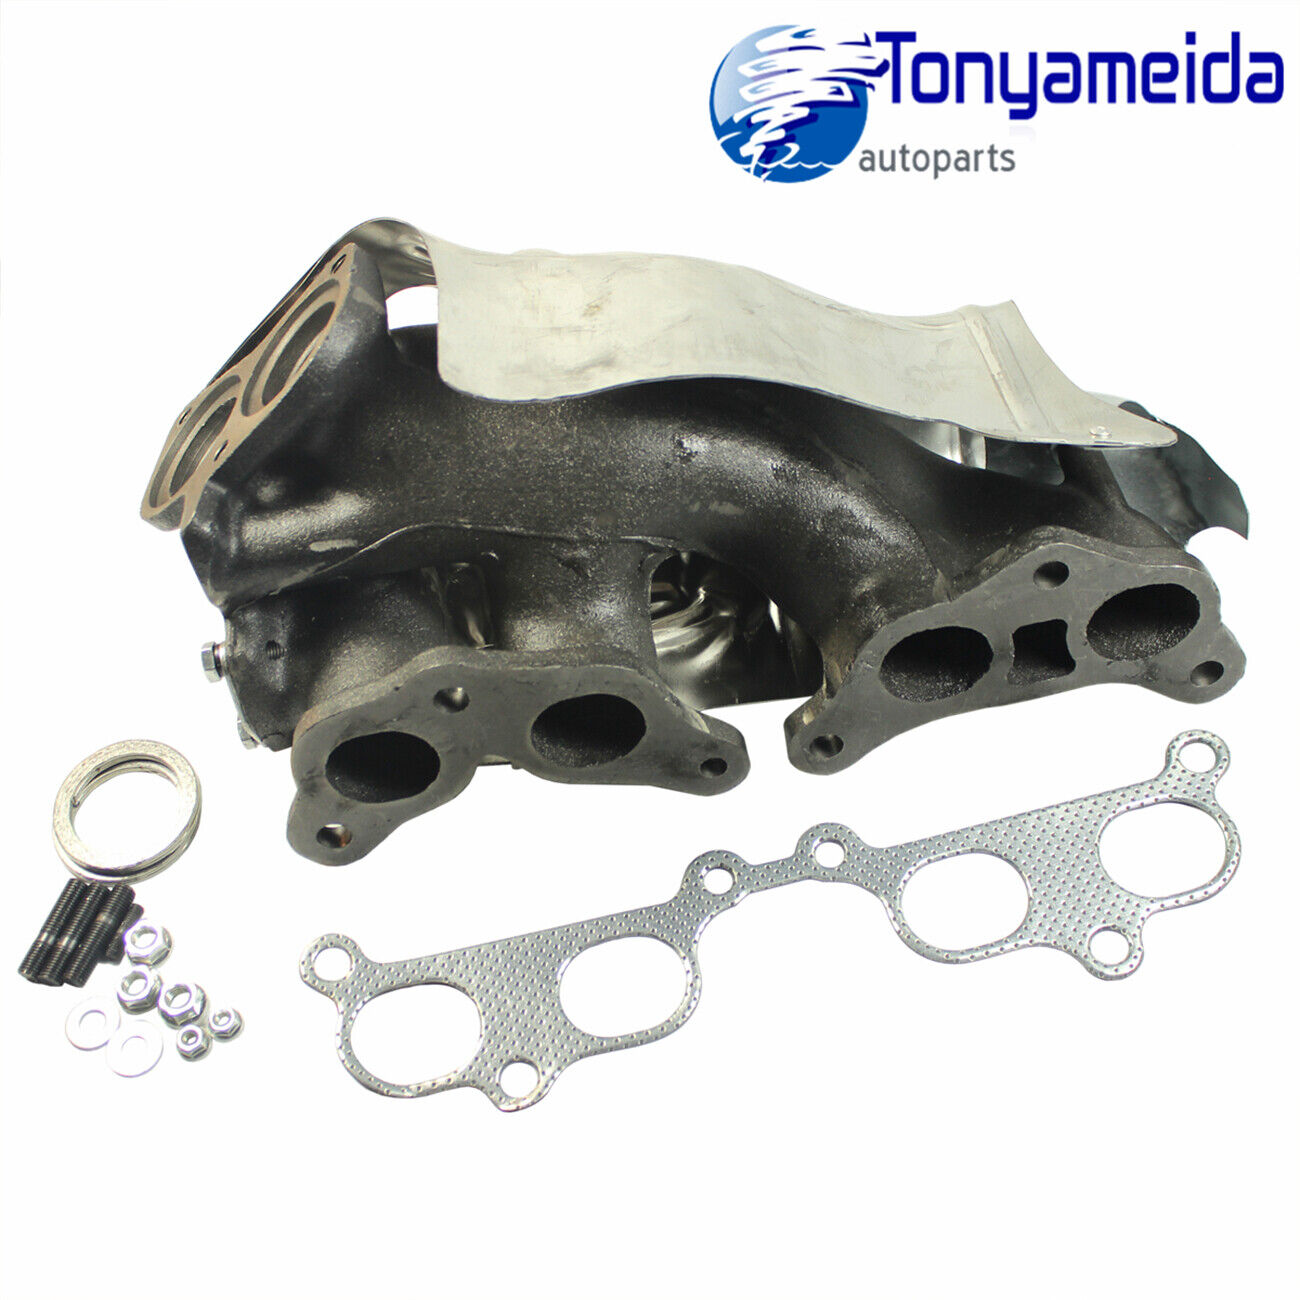 For Toyota 4Runner Tacoma 2.4L 2.7L T100 Truck Exhaust Manifold & Gasket Kit